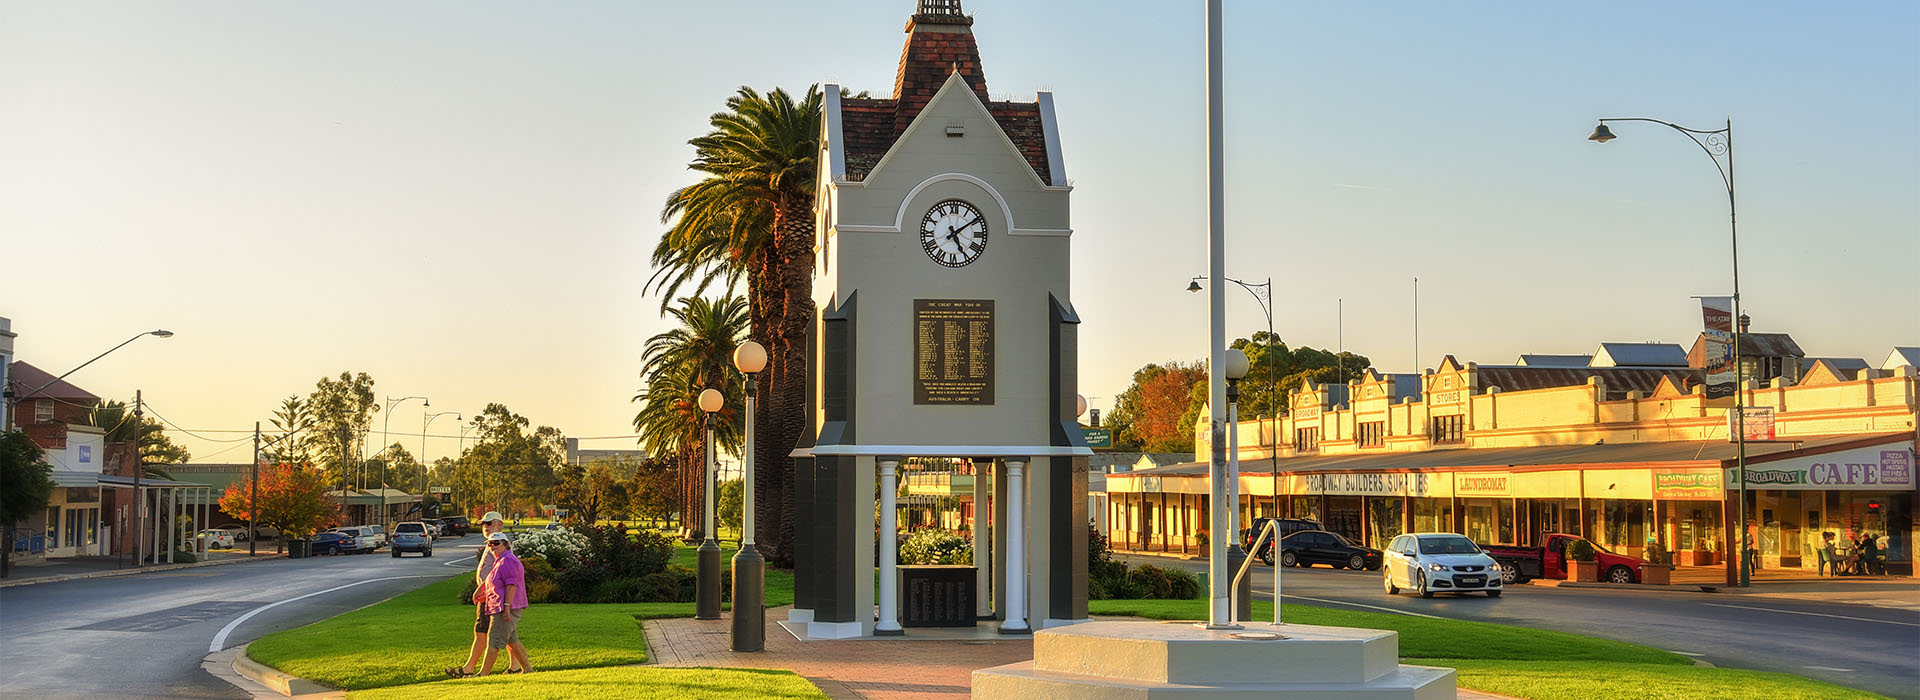 Things to do and see in Junee